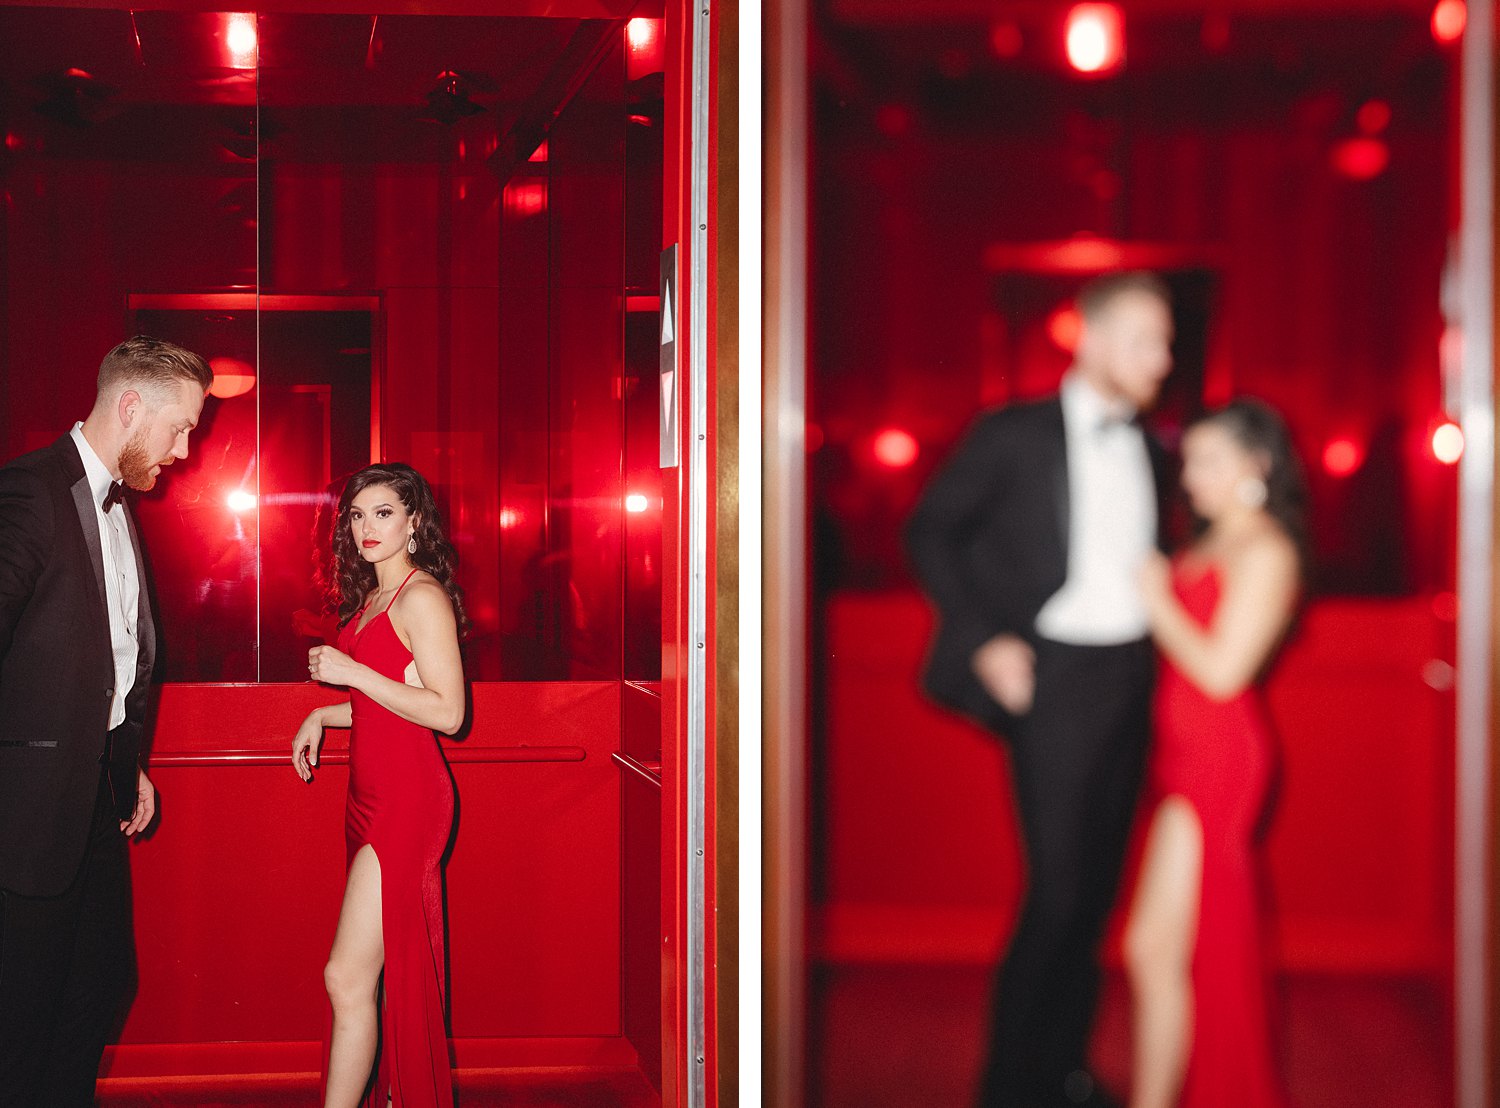 Woman in Red Dress standing with man in elevator